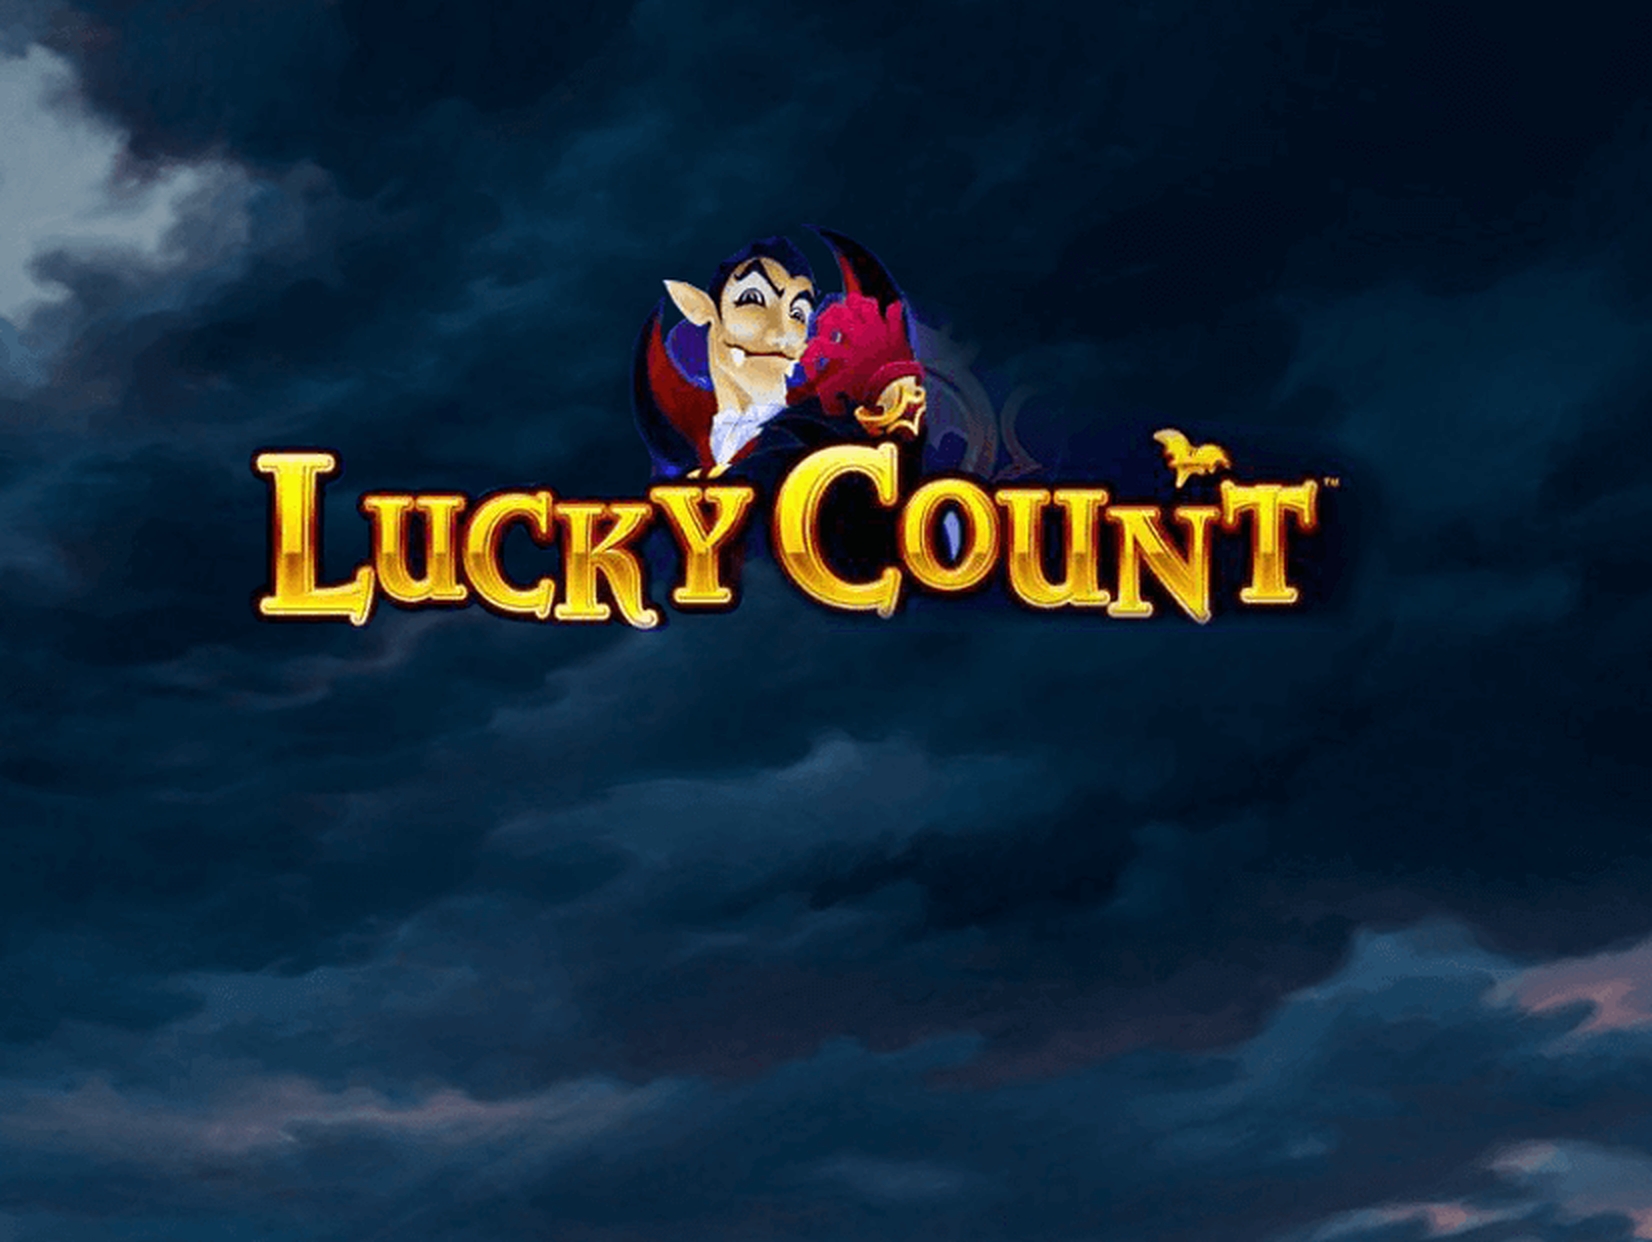 Lucky Count demo